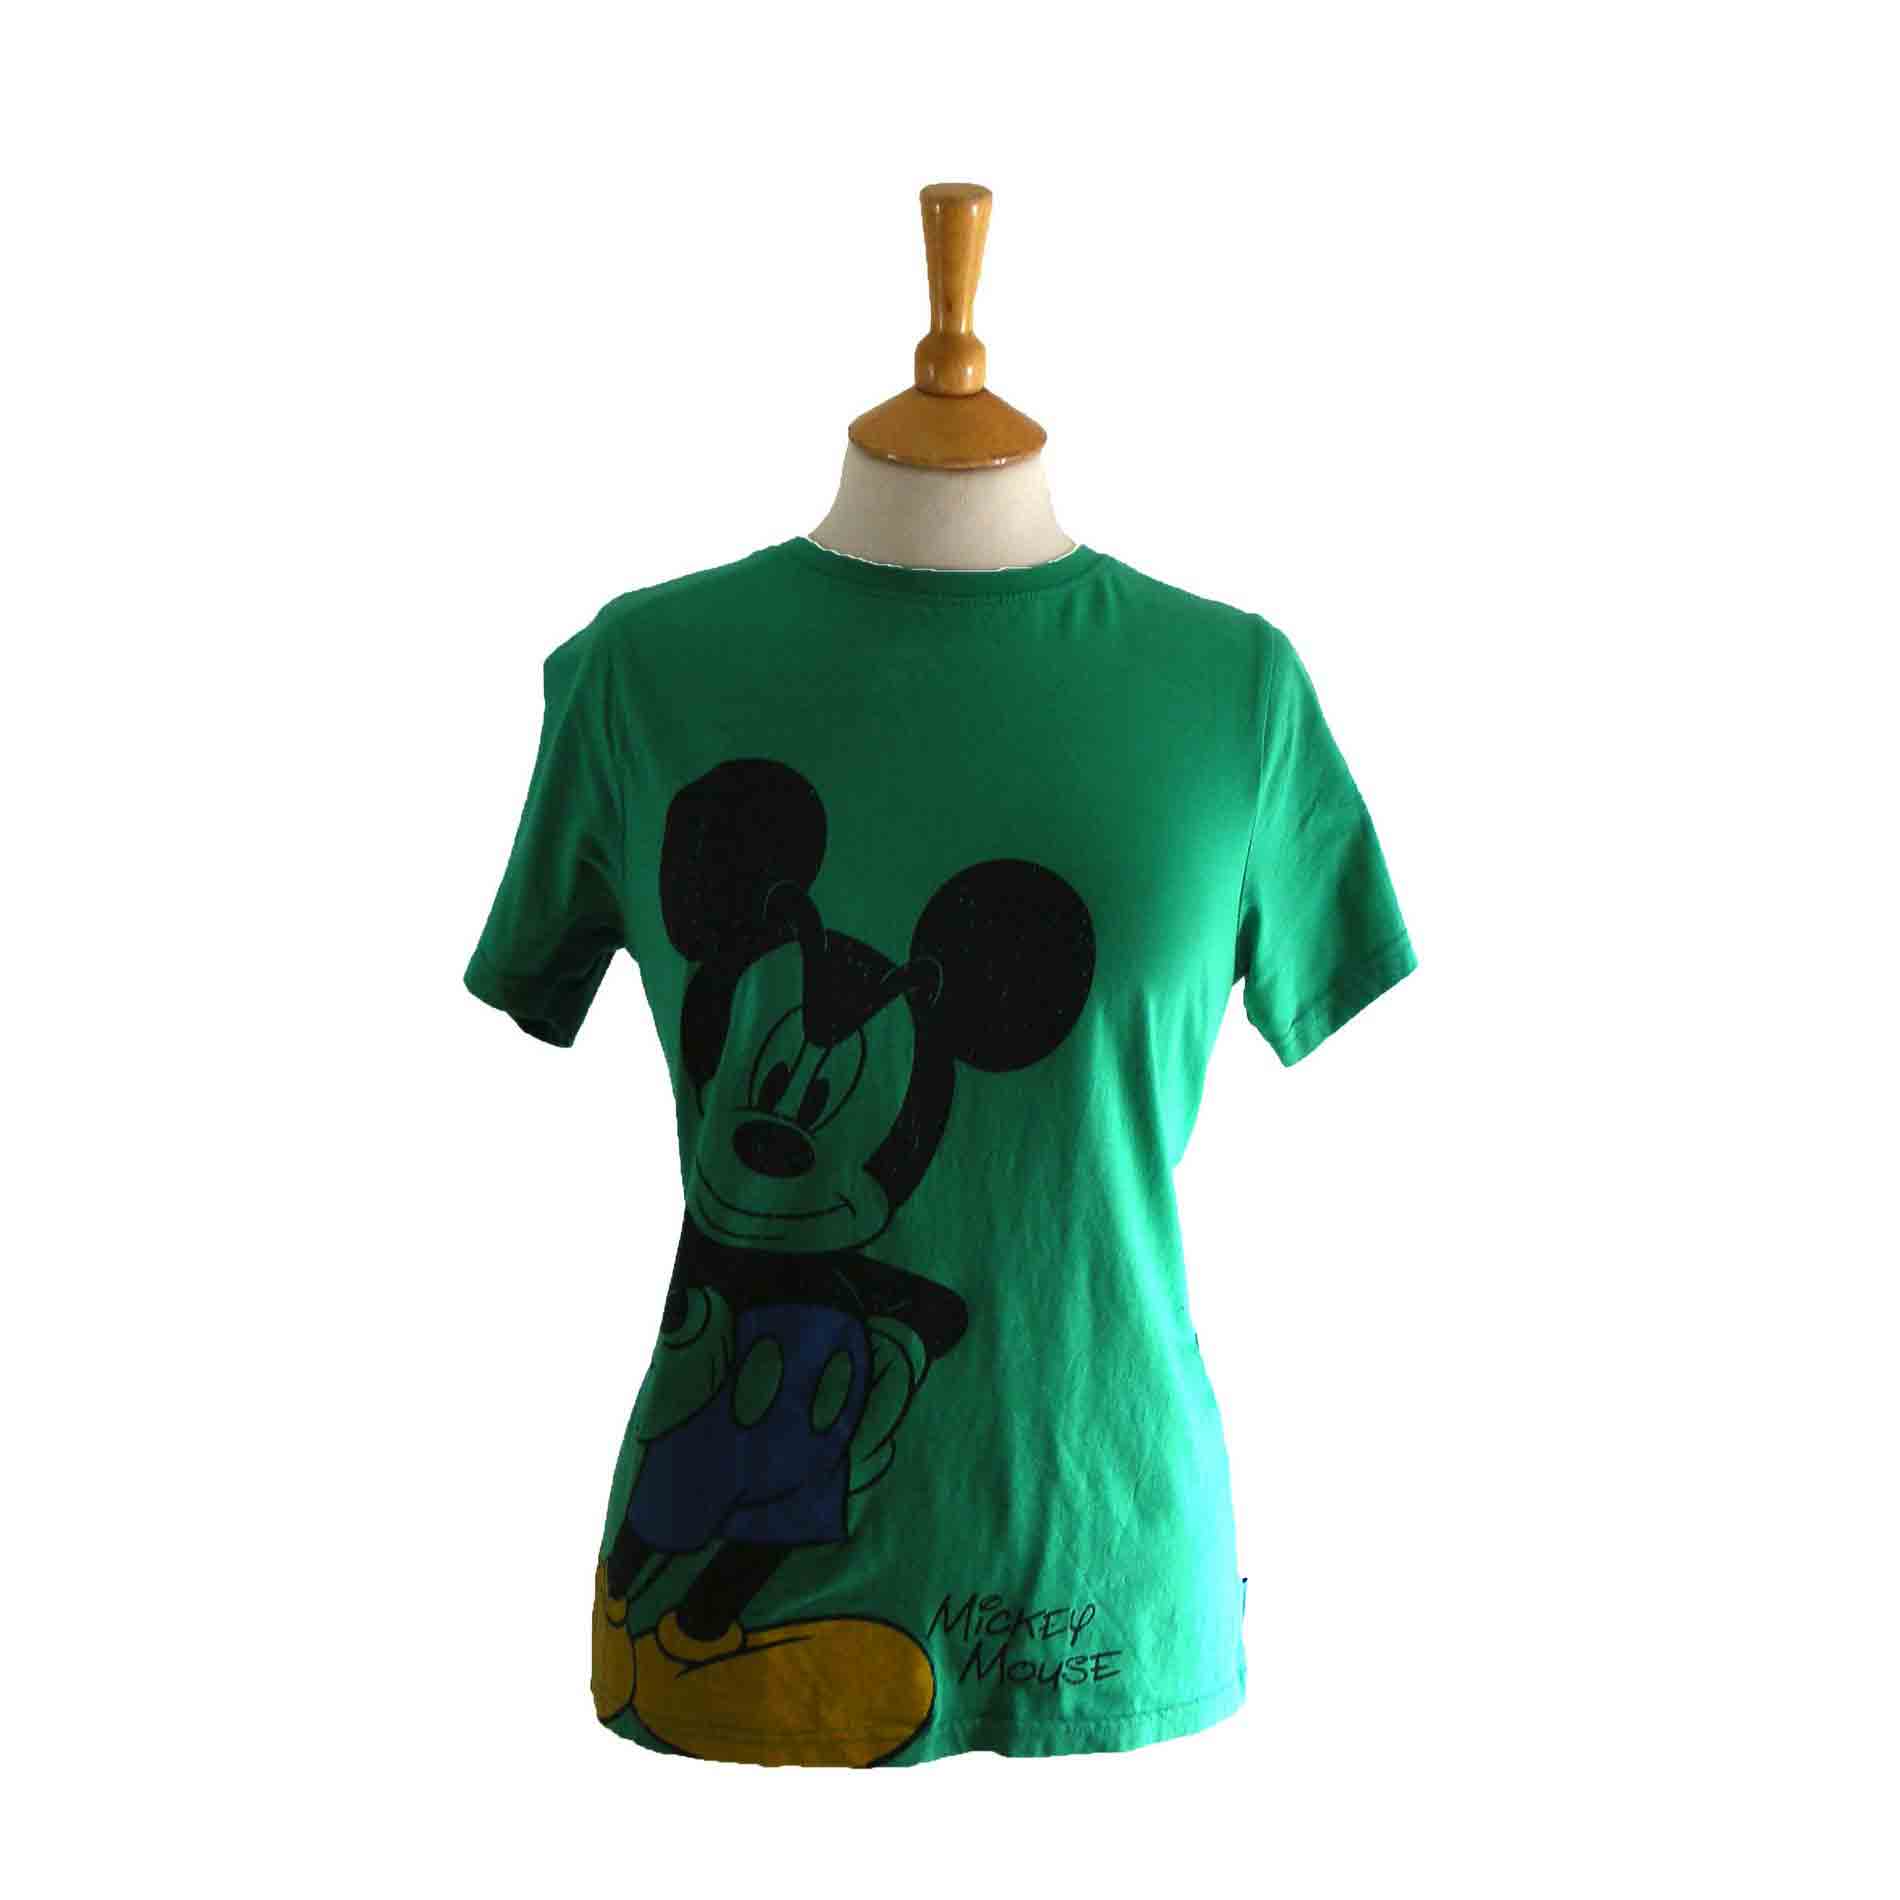 Green Micky Mouse T-shirt - Blue 17 Vintage Clothing